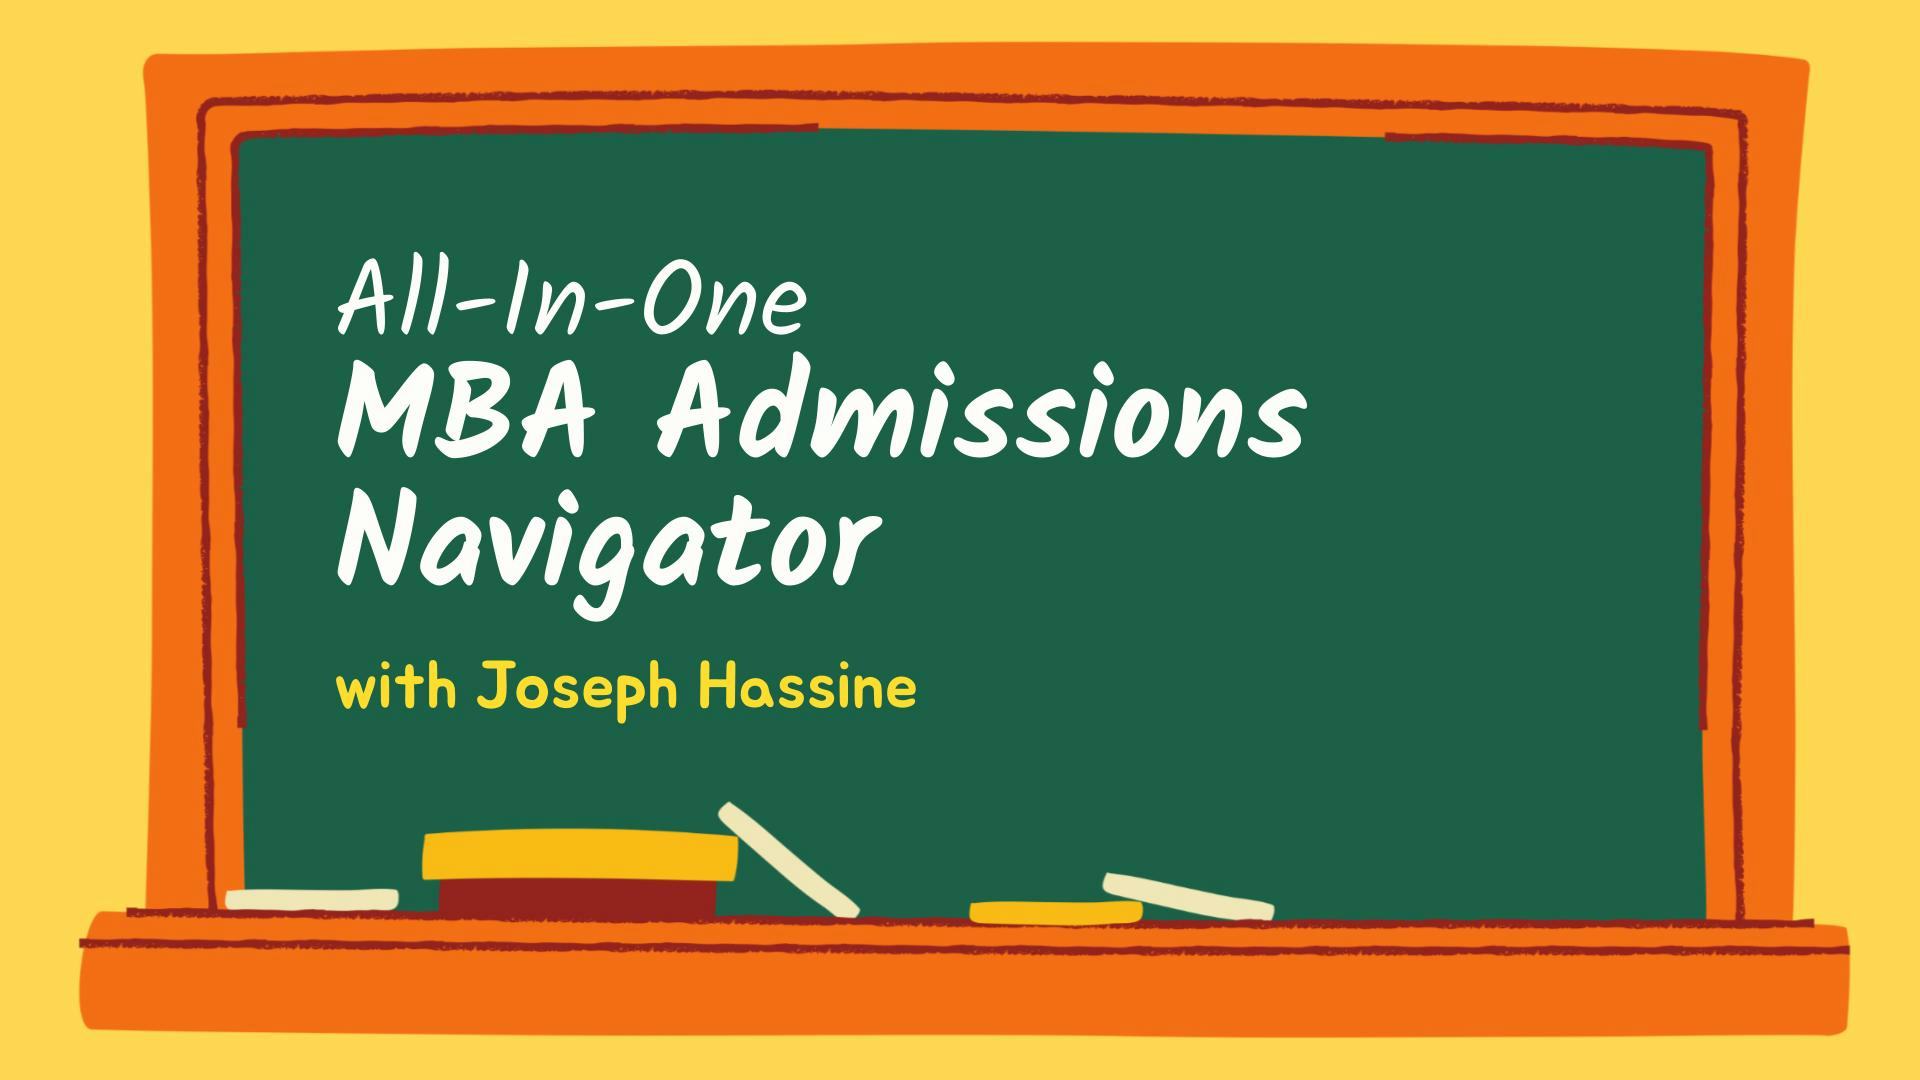 All-In-One MBA Admissions Navigator